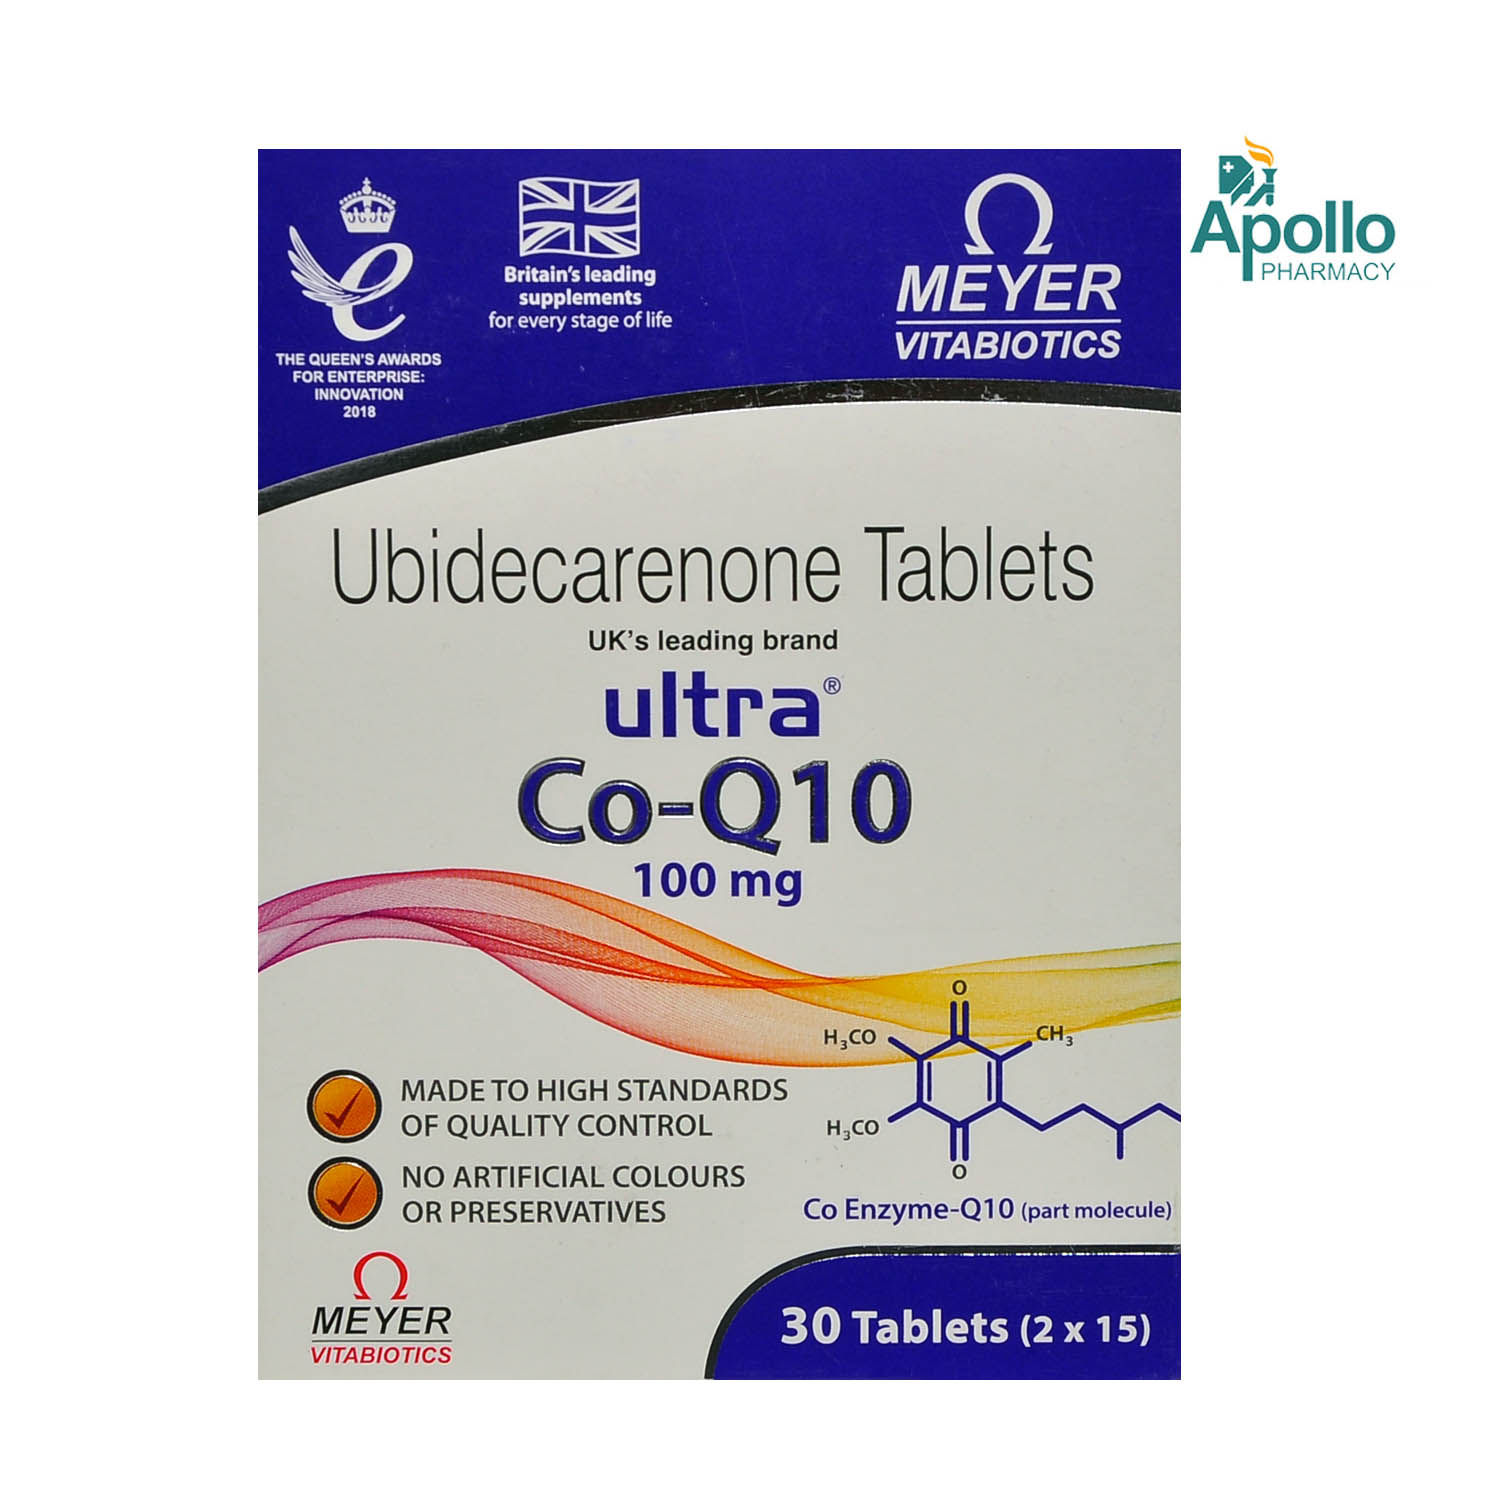 Ultra Co-Q10 100 mg Tablet 15's, Pack of 15 TABLETS